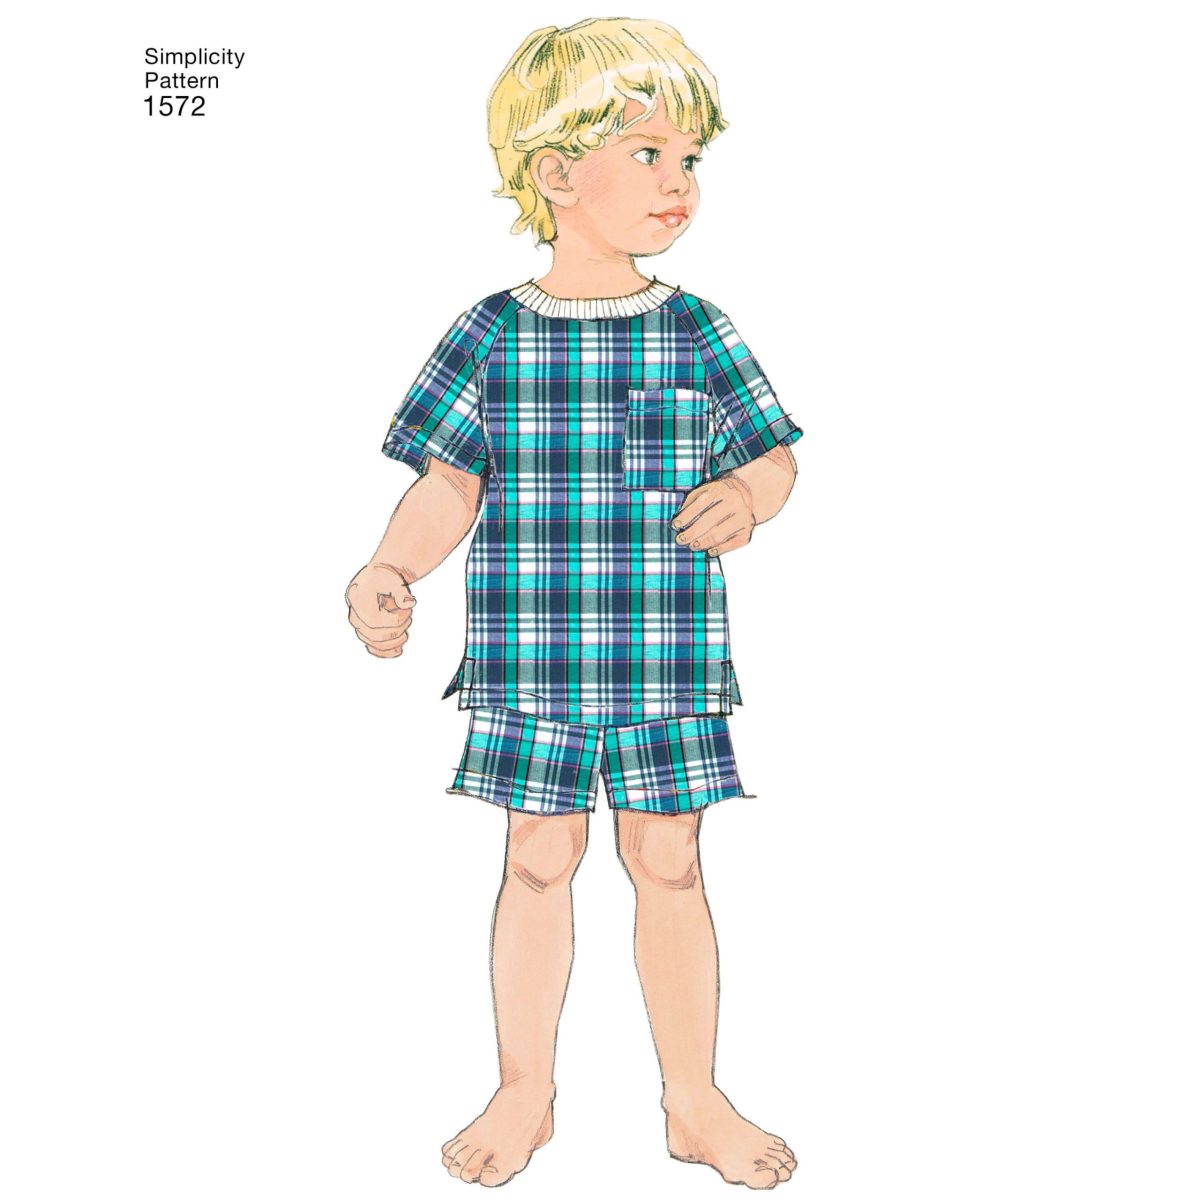 Simplicity Sewing Pattern 1572 Toddlers' and Child's Sleepwear and Robe